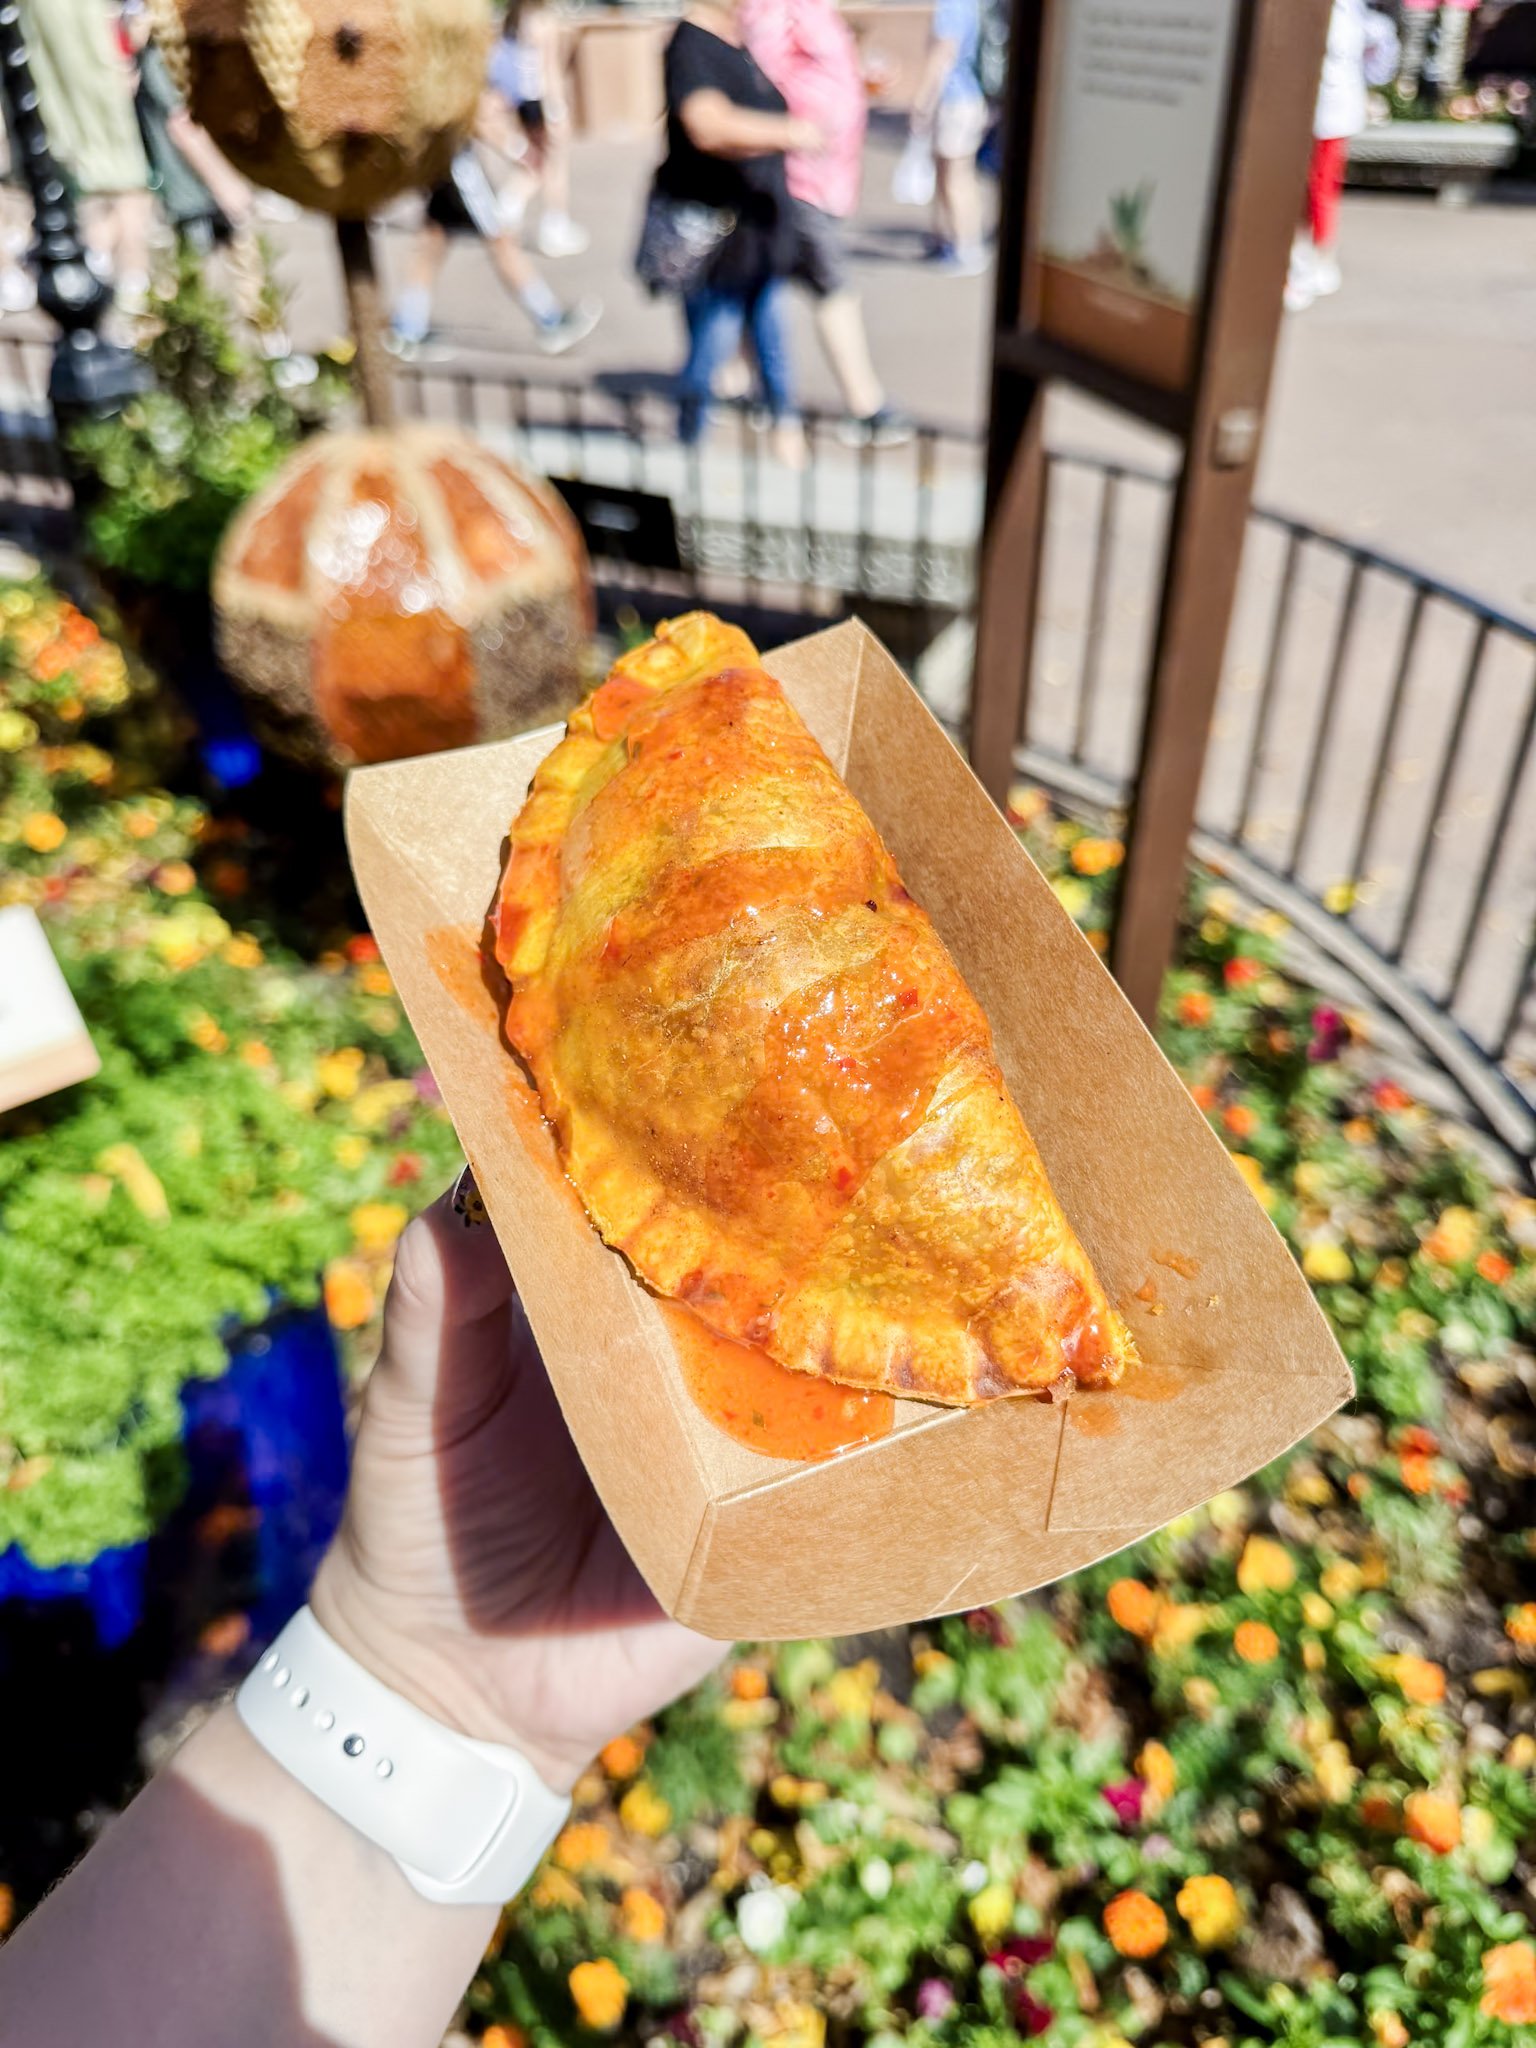 Impossible Jamaican Beef Patty with Spicy Papaya Syrup (plant-based item)